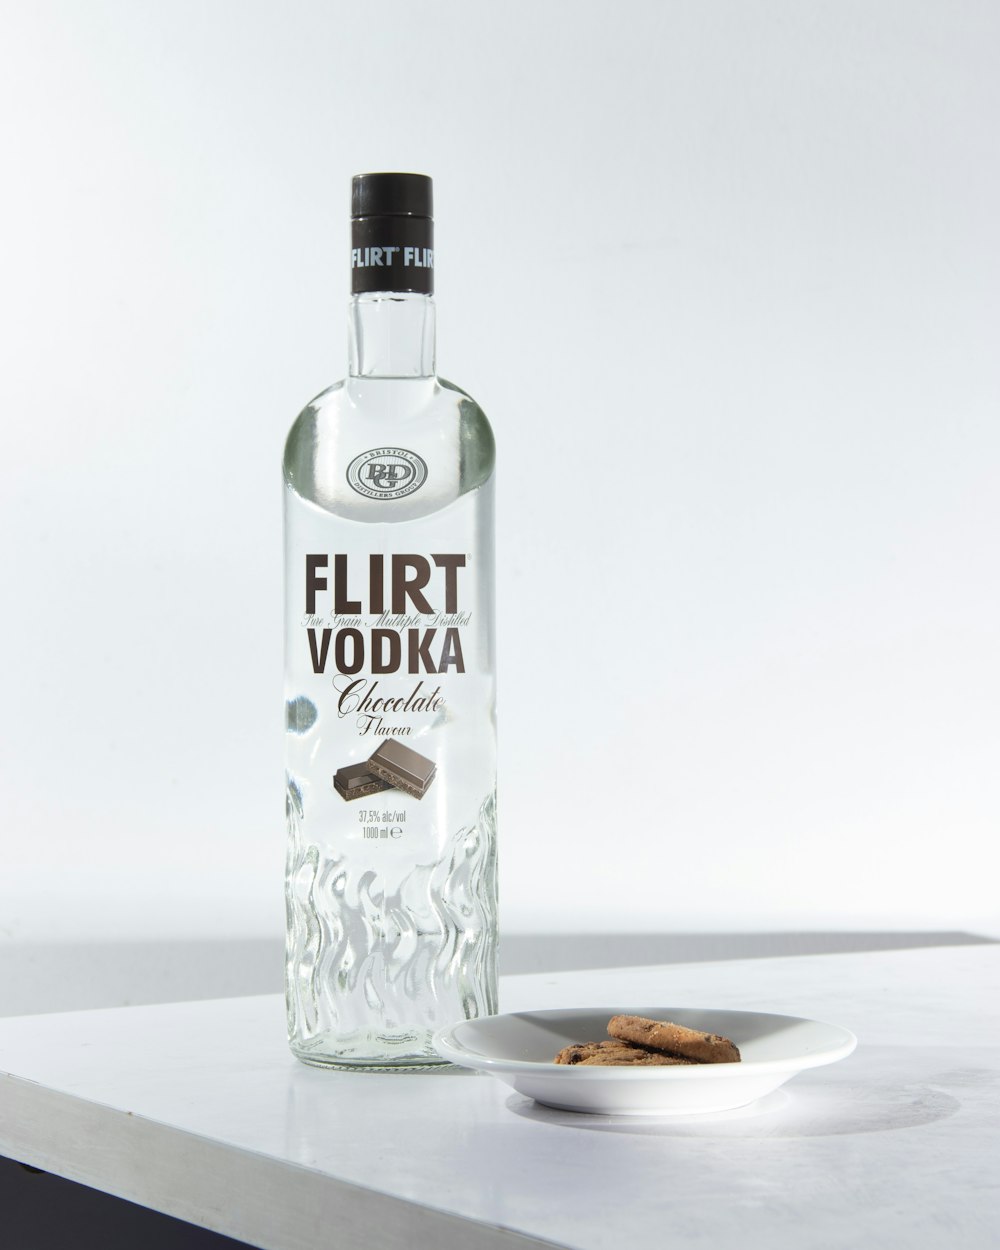 a bottle of vodka next to a plate of cookies